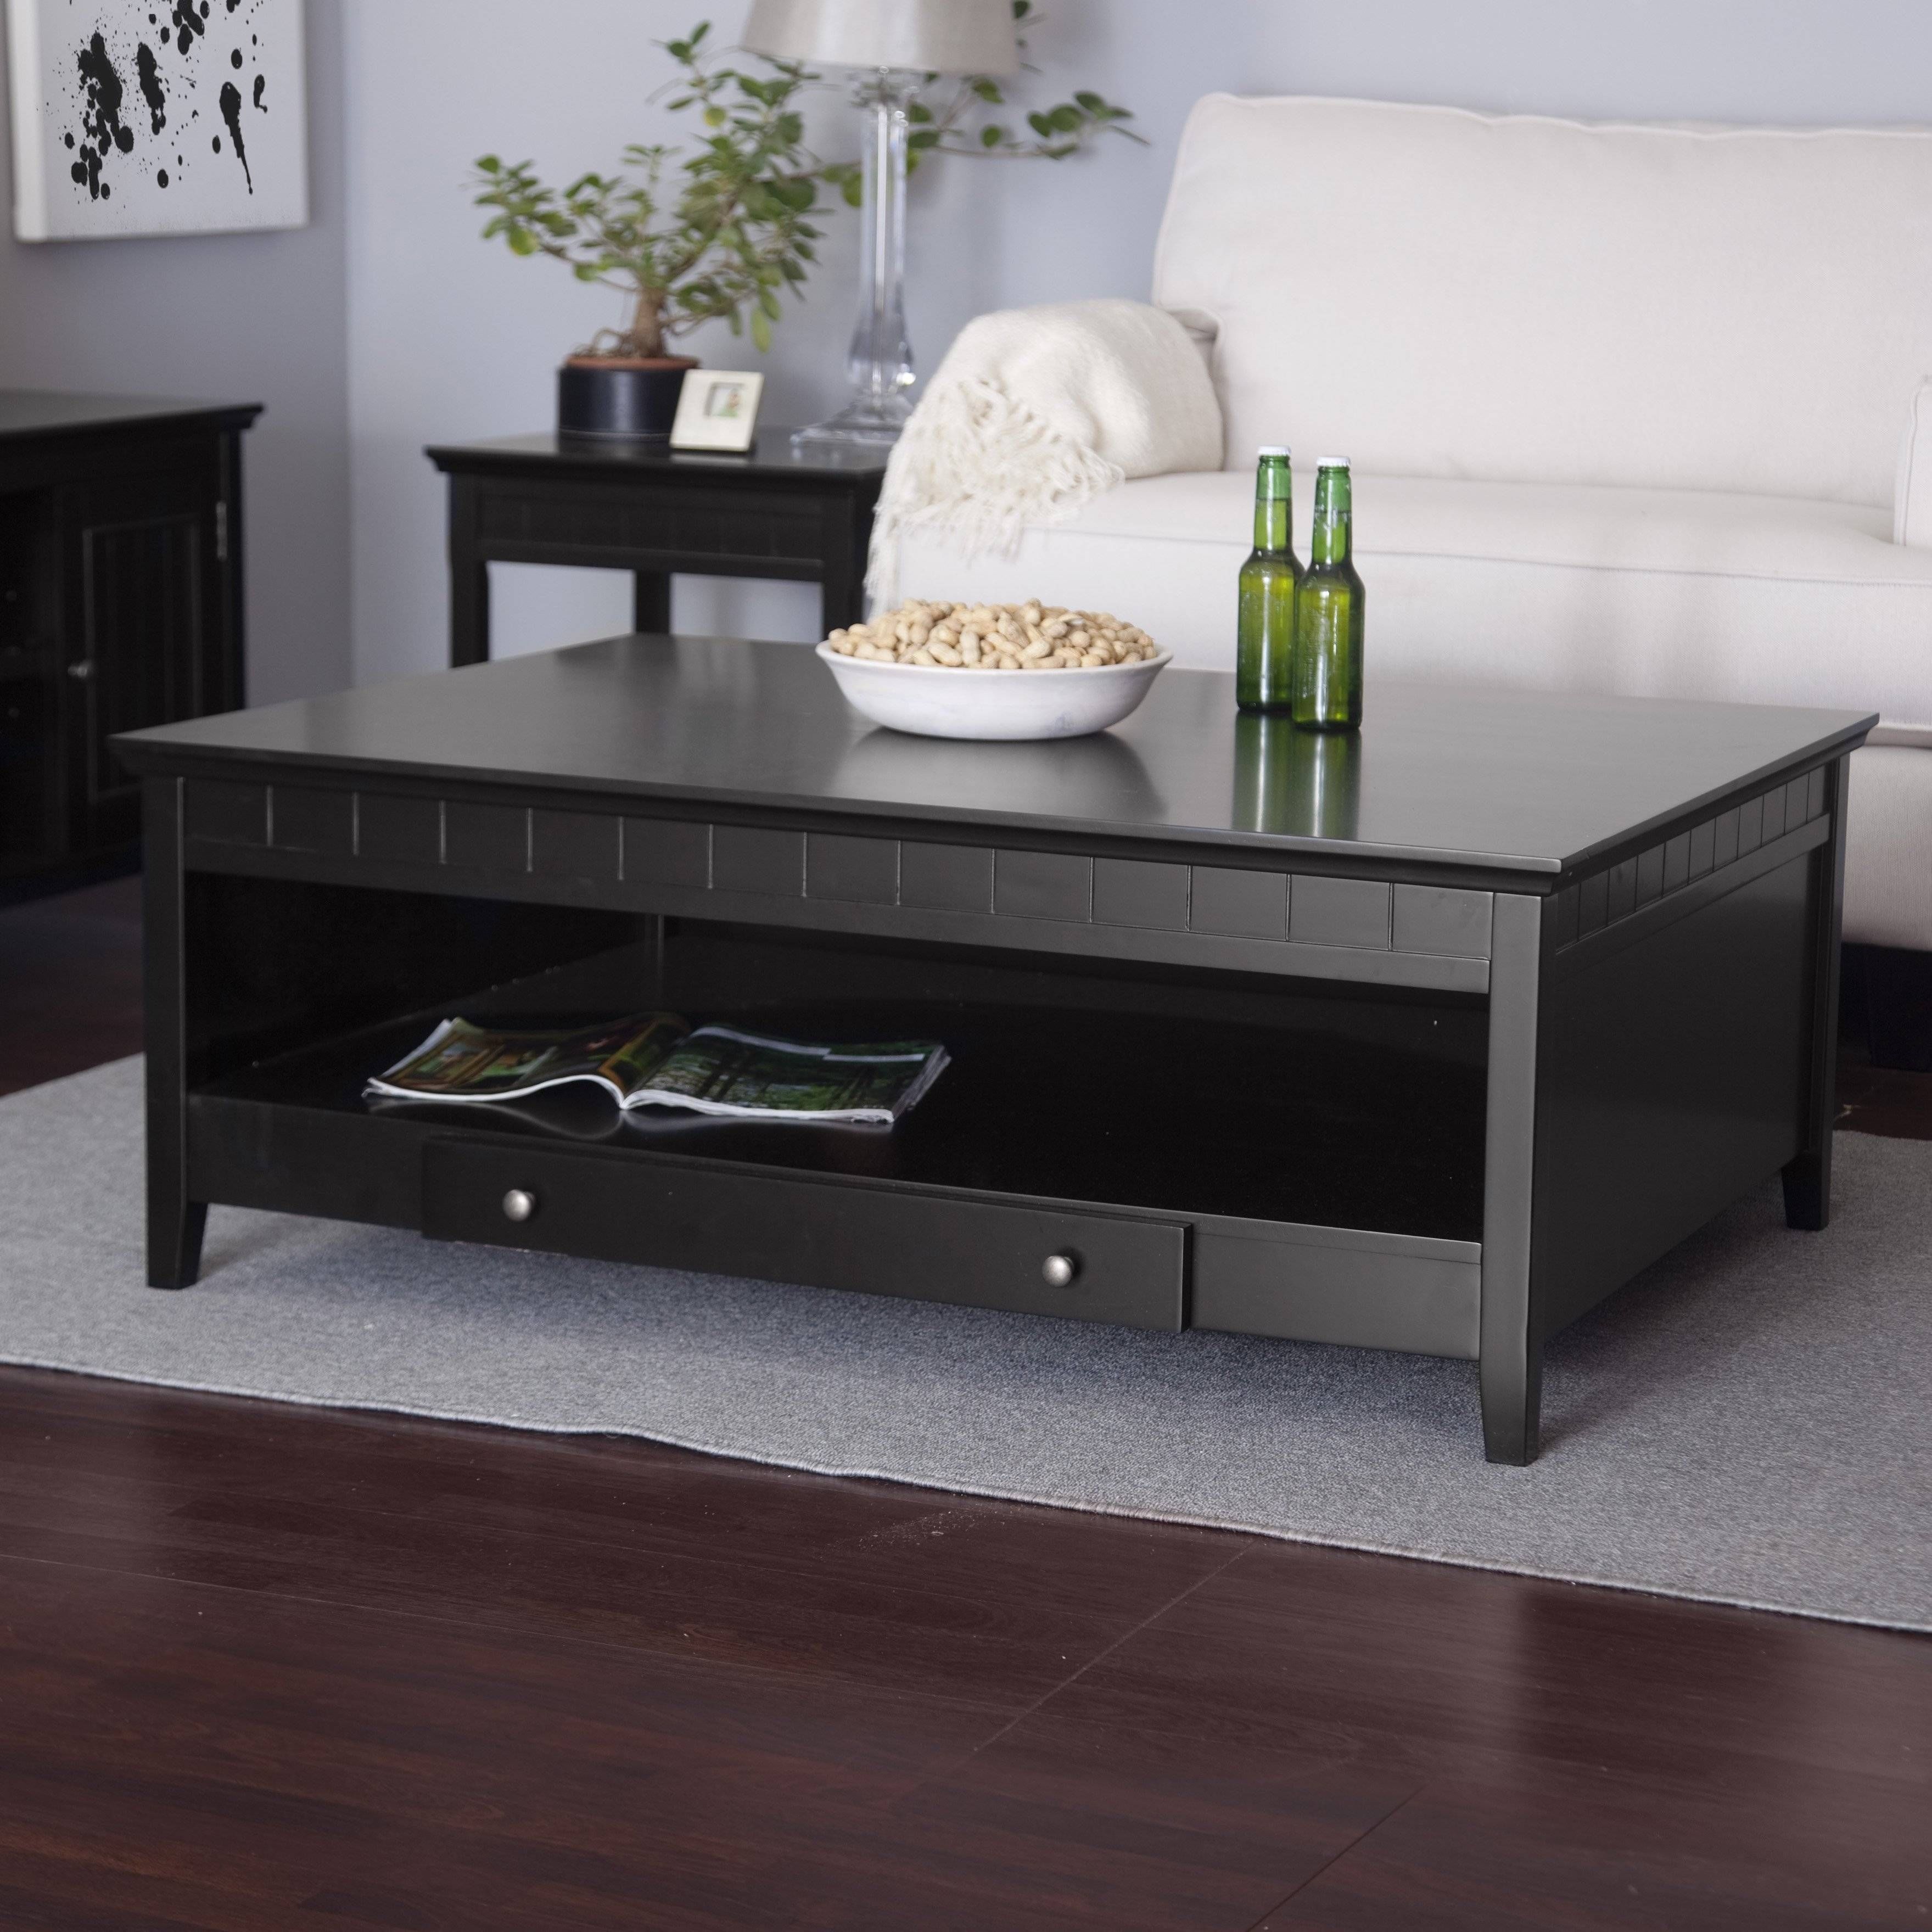 Coffee Tables: New Small Coffee Tables With Storage Design Ideas Within Small Coffee Tables With Storage (View 7 of 30)